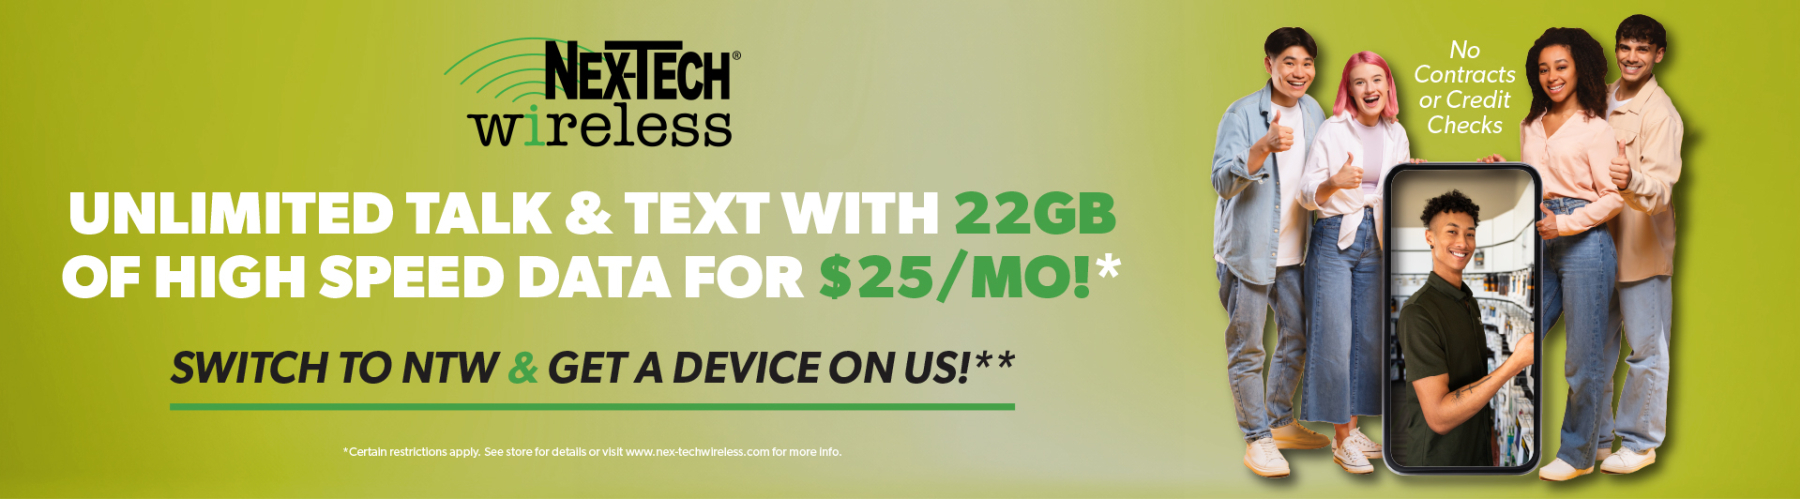 Unlimited talk and text with 22gb of high speed data for $25/mo.